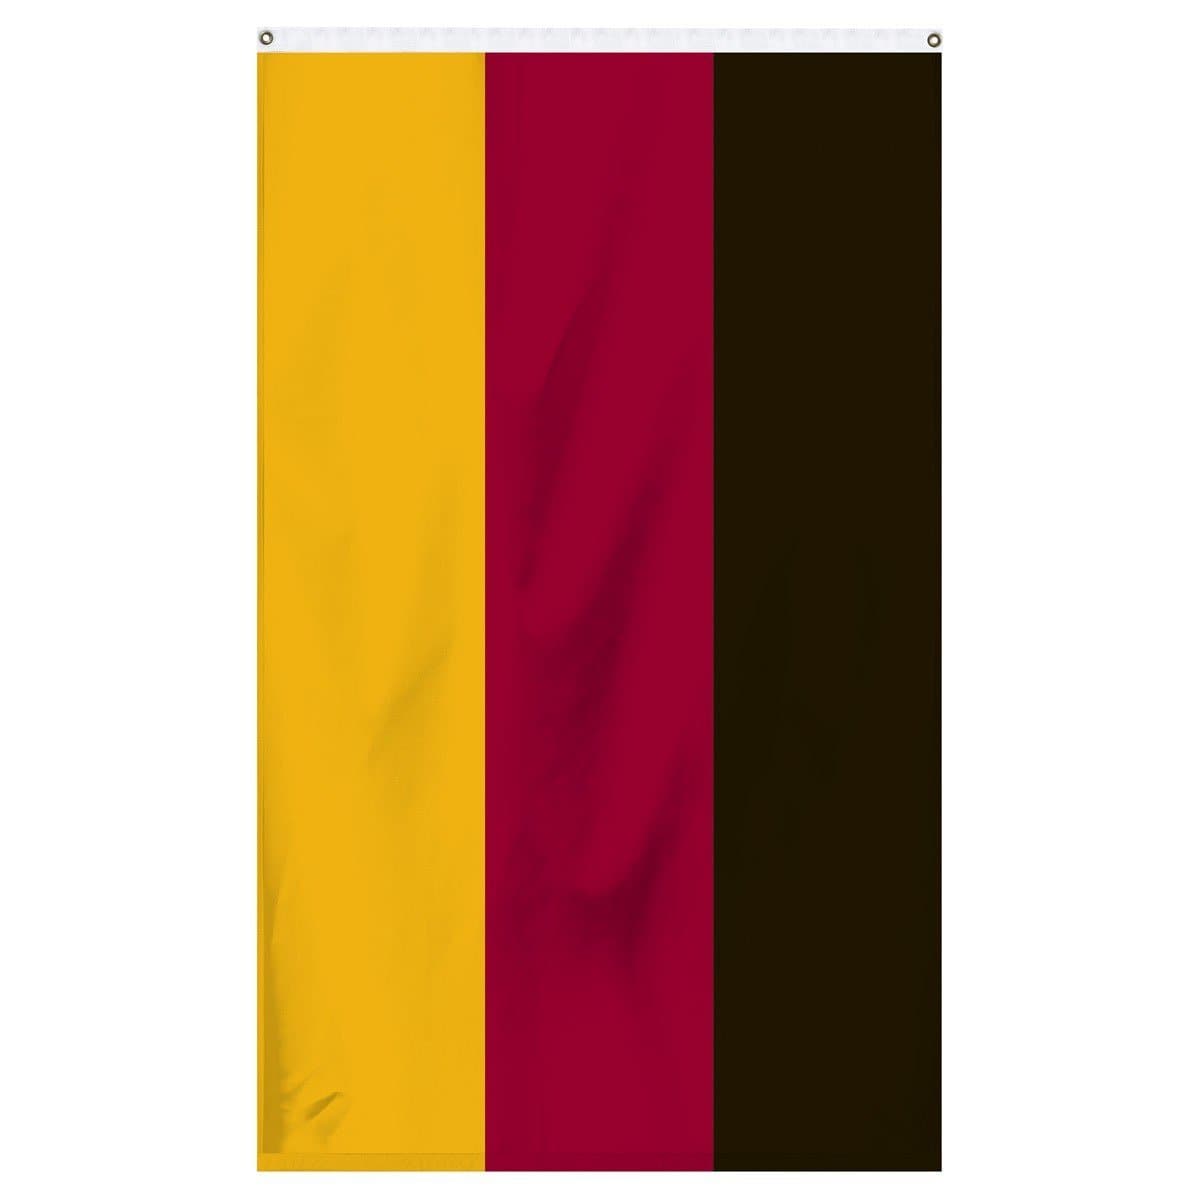 The official flag of Germany for sale to buy online